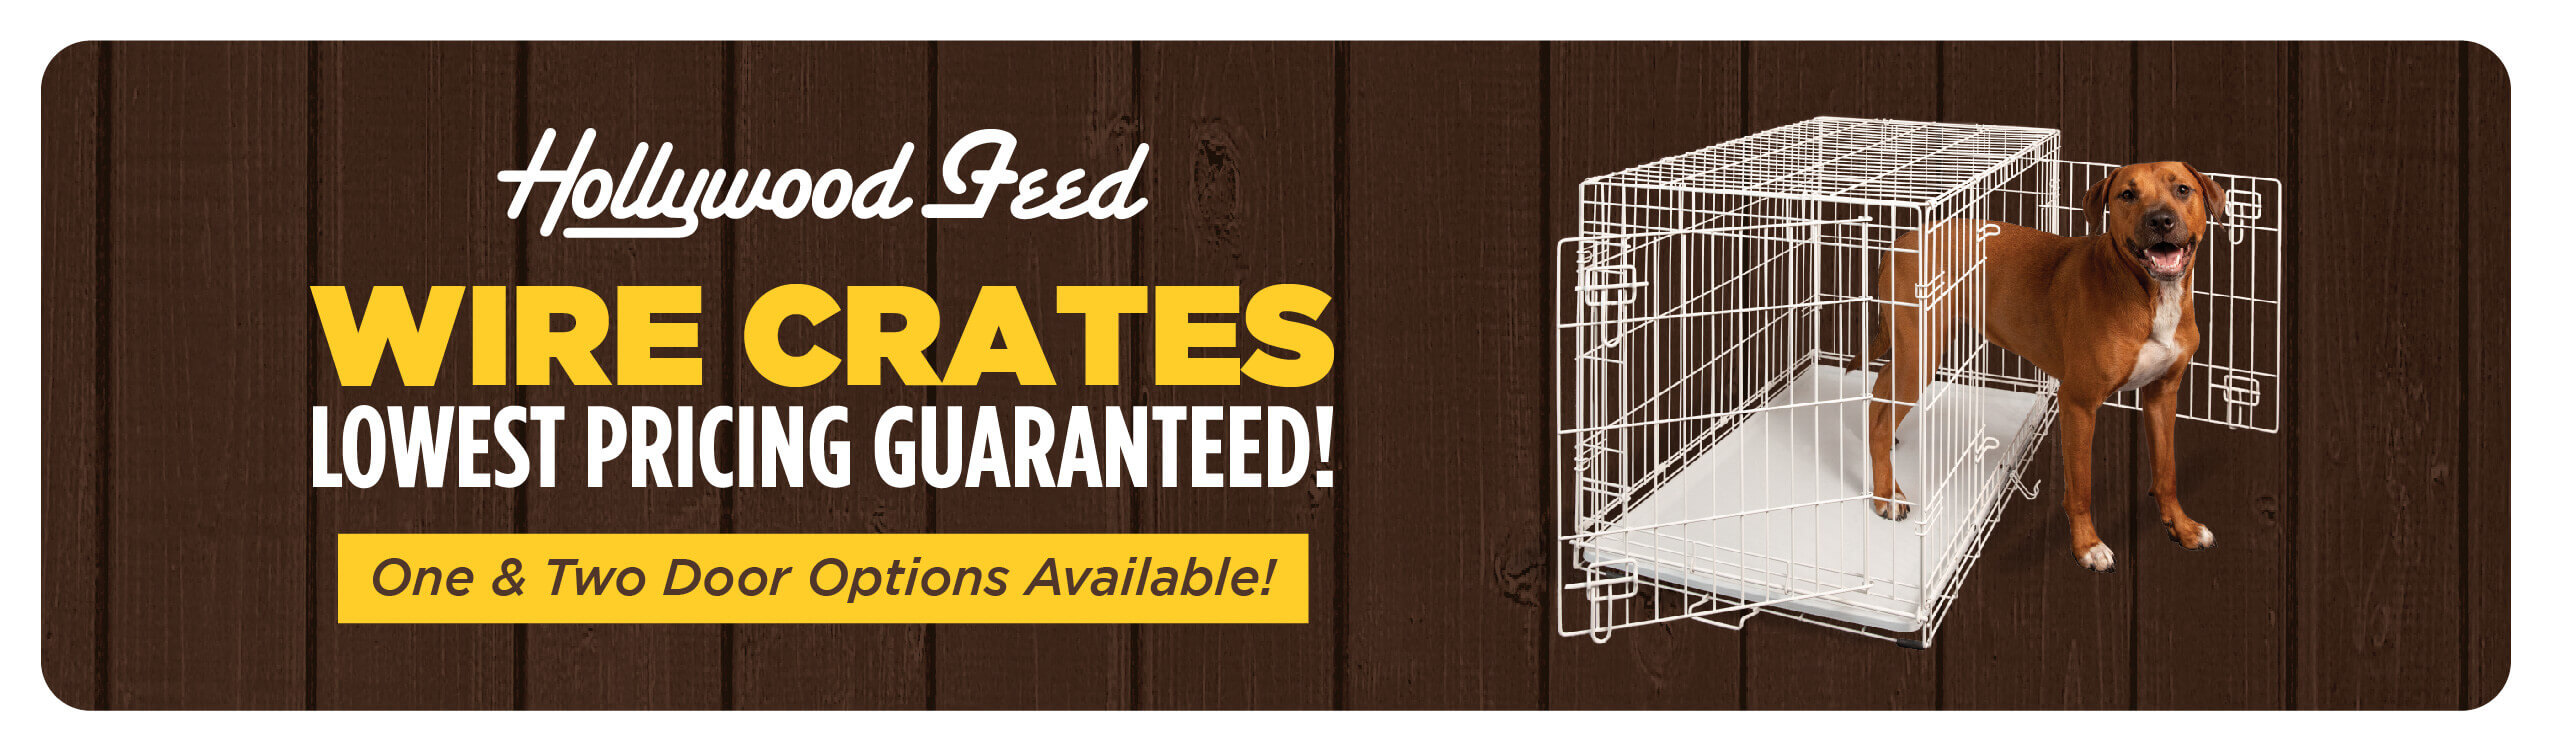 Hollywood Feed Wire Crates. Lowest Pricing Guaranteed. One and Two Door Options Available!